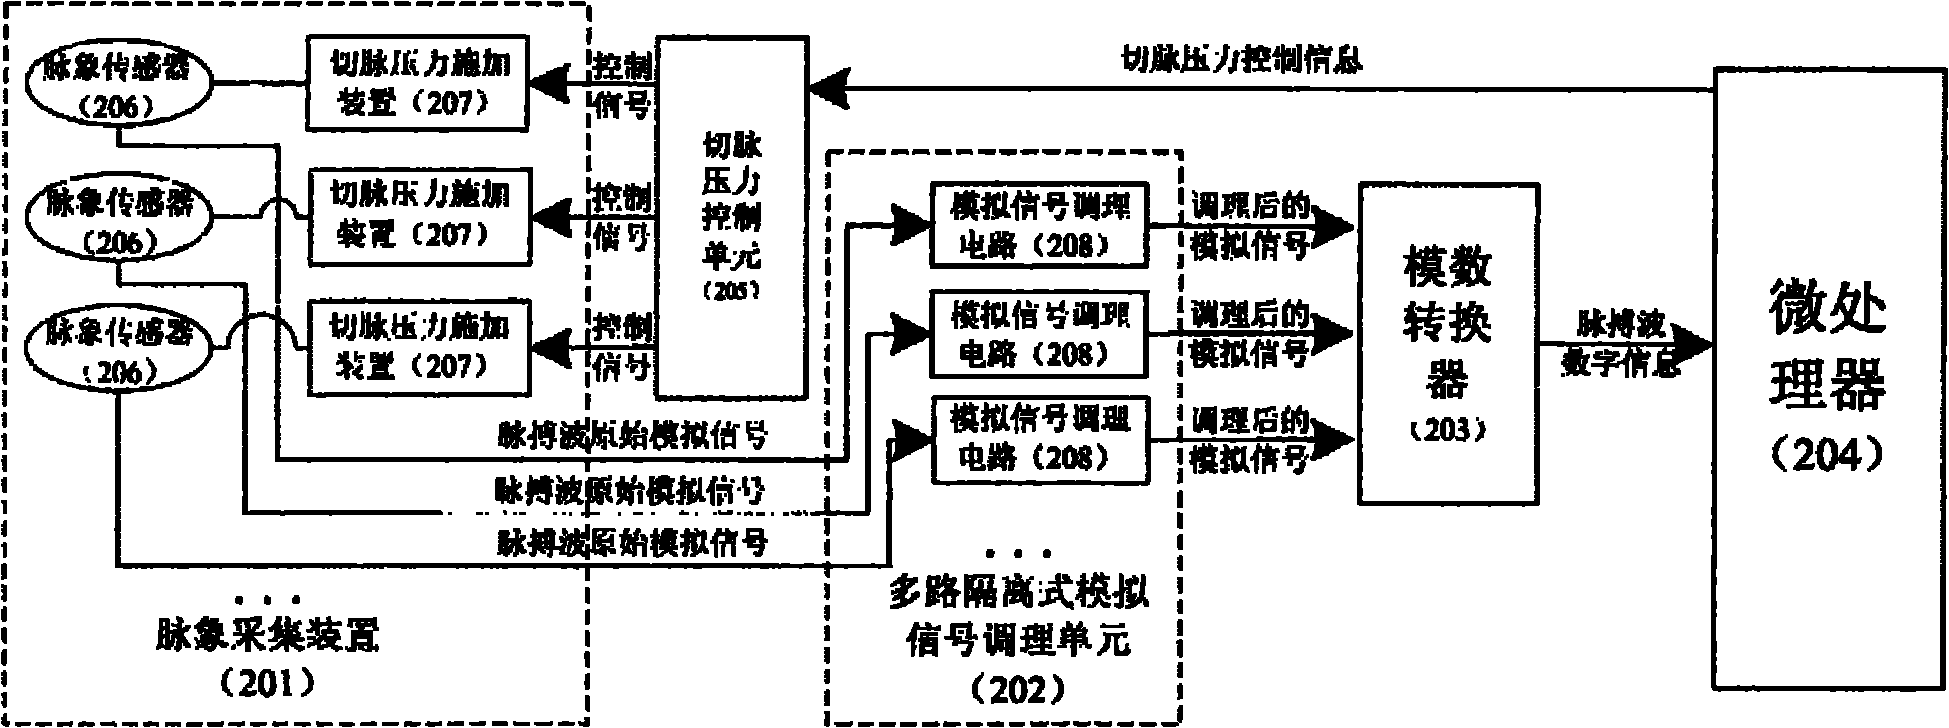 Human body pulse information collecting device and human body health status monitoring device